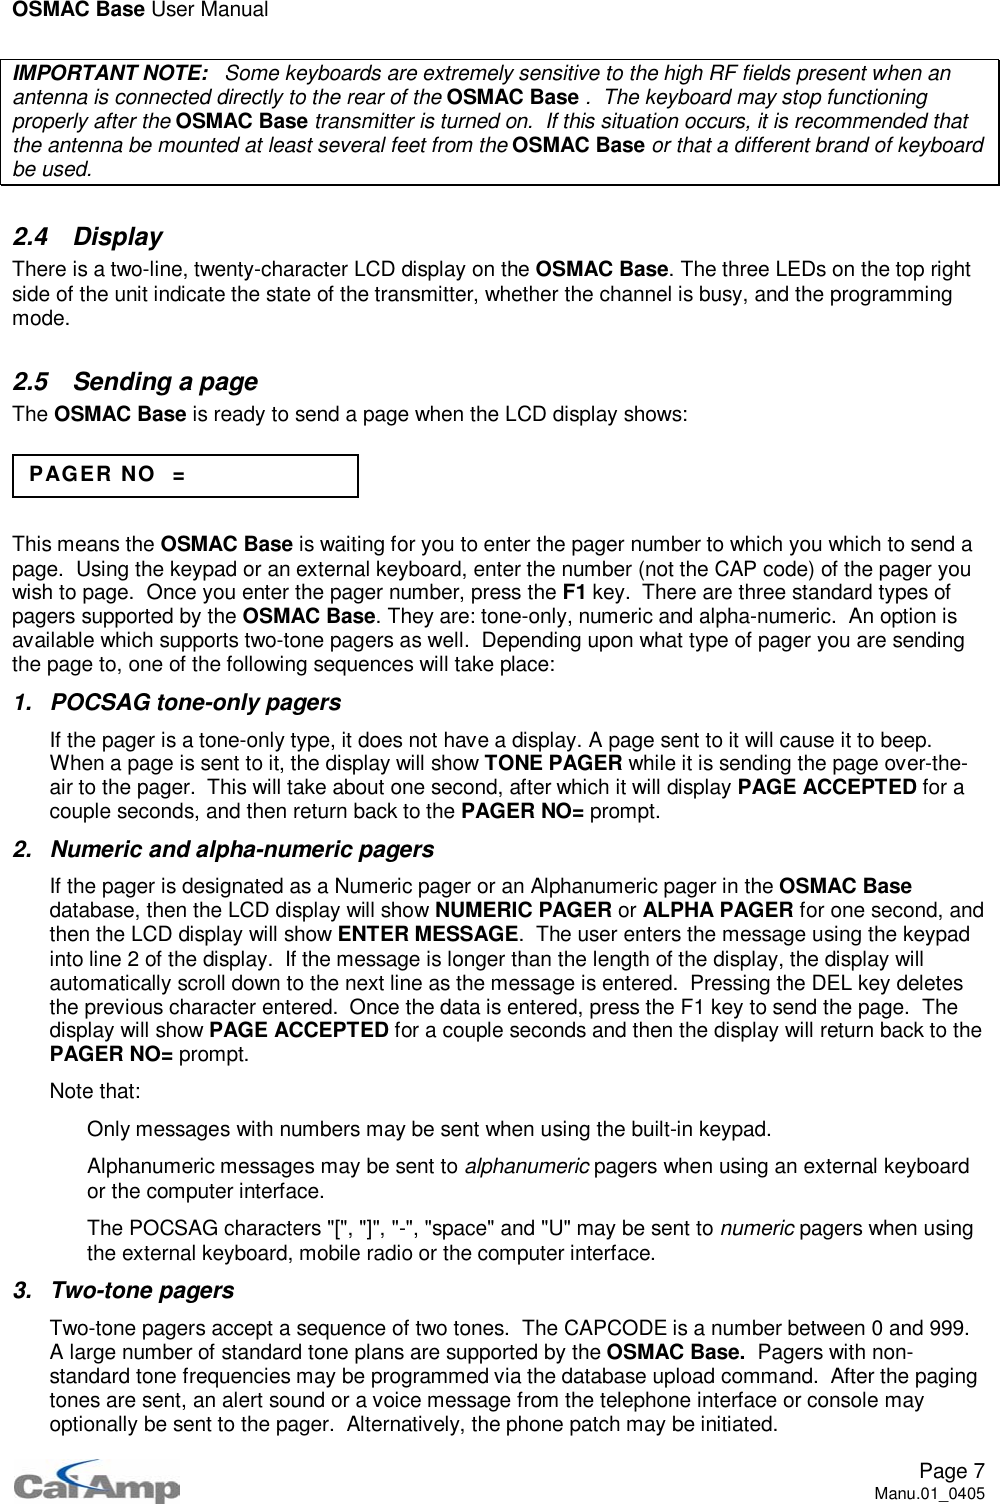 OSMAC Base User ManualPage 7Manu.01_0405IMPORTANT NOTE: Some keyboards are extremely sensitive to the high RF fields present when anantenna is connected directly to the rear of the OSMAC Base . The keyboard may stop functioningproperly after the OSMAC Base transmitter is turned on. If this situation occurs, it is recommended thatthe antenna be mounted at least several feet from the OSMAC Base or that a different brand of keyboardbe used.2.4 DisplayThere is a two-line, twenty-character LCD display on the OSMAC Base. The three LEDs on the top rightside of the unit indicate the state of the transmitter, whether the channel is busy, and the programmingmode.2.5 Sending a pageThe OSMAC Base is ready to send a page when the LCD display shows:This means the OSMAC Base is waiting for you to enter the pager number to which you which to send apage. Using the keypad or an external keyboard, enter the number (not the CAP code) of the pager youwish to page. Once you enter the pager number, press the F1 key. There are three standard types ofpagers supported by the OSMAC Base. They are: tone-only, numeric and alpha-numeric. An option isavailable which supports two-tone pagers as well. Depending upon what type of pager you are sendingthe page to, one of the following sequences will take place:1. POCSAG tone-only pagersIf the pager is a tone-only type, it does not have a display. A page sent to it will cause it to beep.When a page is sent to it, the display will show TONE PAGER while it is sending the page over-the-air to the pager. This will take about one second, after which it will display PAGE ACCEPTED for acouple seconds, and then return back to the PAGER NO= prompt.2. Numeric and alpha-numeric pagersIf the pager is designated as a Numeric pager or an Alphanumeric pager in the OSMAC Basedatabase, then the LCD display will show NUMERIC PAGER or ALPHA PAGER for one second, andthen the LCD display will show ENTER MESSAGE. The user enters the message using the keypadinto line 2 of the display. If the message is longer than the length of the display, the display willautomatically scroll down to the next line as the message is entered. Pressing the DEL key deletesthe previous character entered. Once the data is entered, press the F1 key to send the page. Thedisplay will show PAGE ACCEPTED for a couple seconds and then the display will return back to thePAGER NO= prompt.Note that: Only messages with numbers may be sent when using the built-in keypad. Alphanumeric messages may be sent to alphanumeric pagers when using an external keyboardor the computer interface. The POCSAG characters &quot;[&quot;, &quot;]&quot;, &quot;-&quot;, &quot;space&quot; and &quot;U&quot; may be sent to numeric pagers when usingthe external keyboard, mobile radio or the computer interface.3. Two-tone pagersTwo-tone pagers accept a sequence of two tones. The CAPCODE is a number between 0 and 999.A large number of standard tone plans are supported by the OSMAC Base. Pagers with non-standard tone frequencies may be programmed via the database upload command. After the pagingtones are sent, an alert sound or a voice message from the telephone interface or console mayoptionally be sent to the pager. Alternatively, the phone patch may be initiated.PAGER NO =